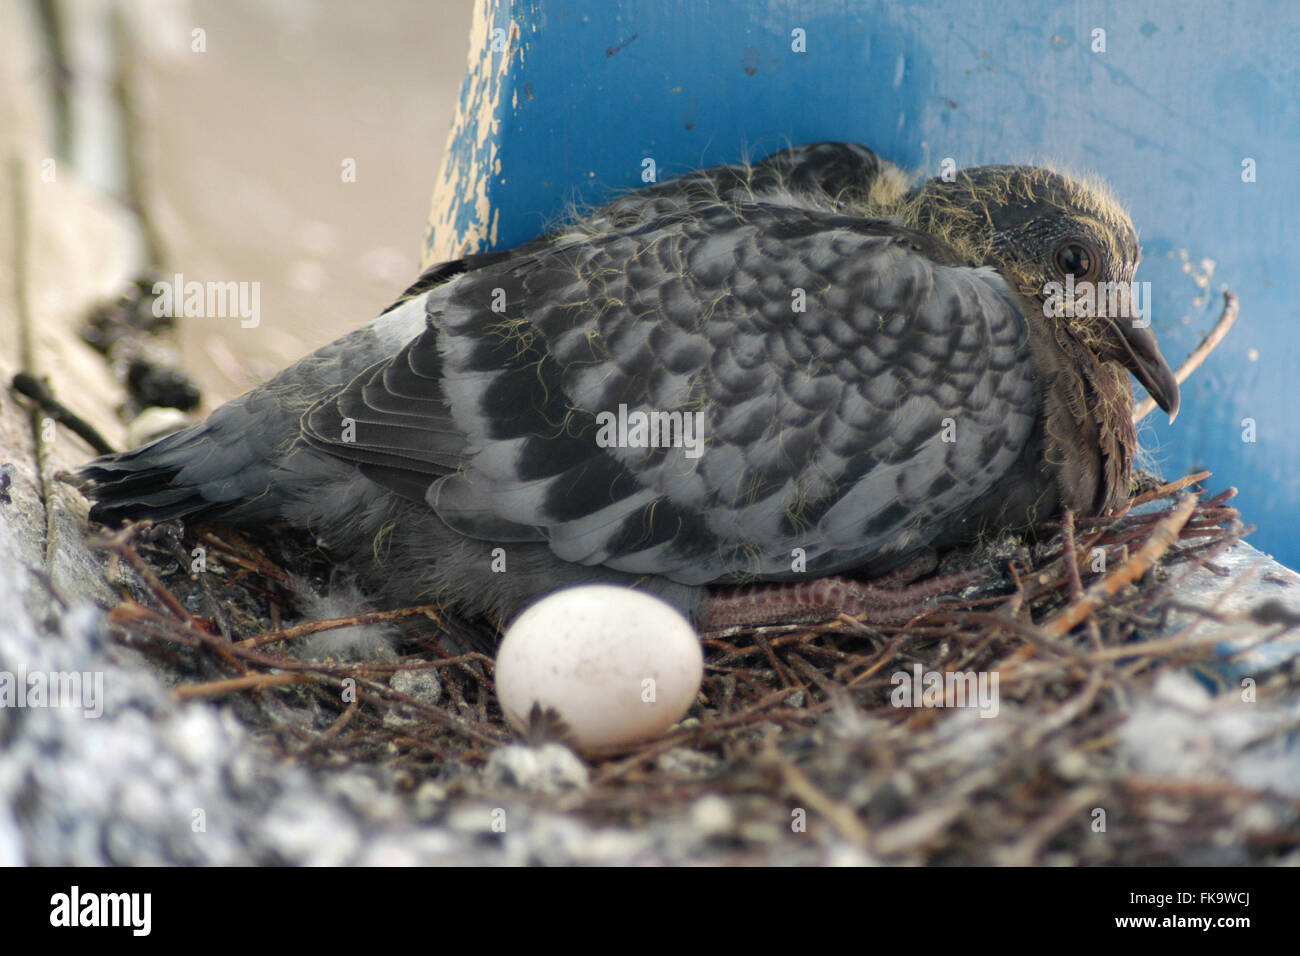 Newly hatched squab of the rock pigeon (Columba livia) sitting next to the pigeon egg in the nest on an urban balcony in Prague, Czech Republic. The nest is pictured 21 days after the squab hatched out. Stock Photo